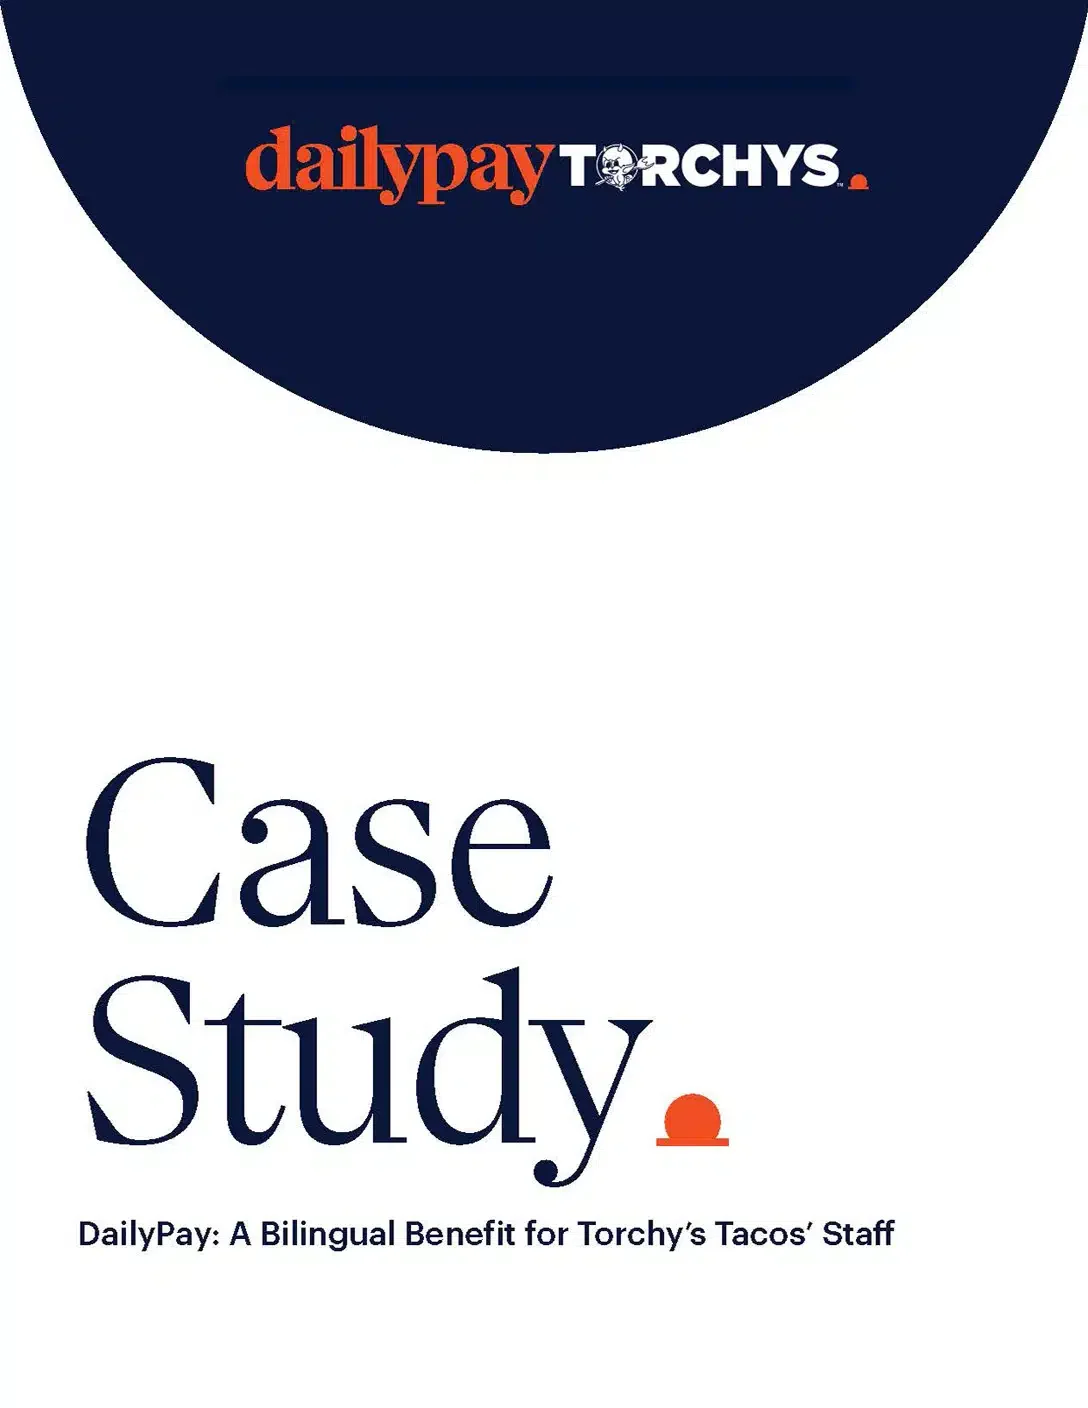 Cover page of a document titled "Case Study," detailing how DailyPay benefits the bilingual staff at Torchy's Tacos.